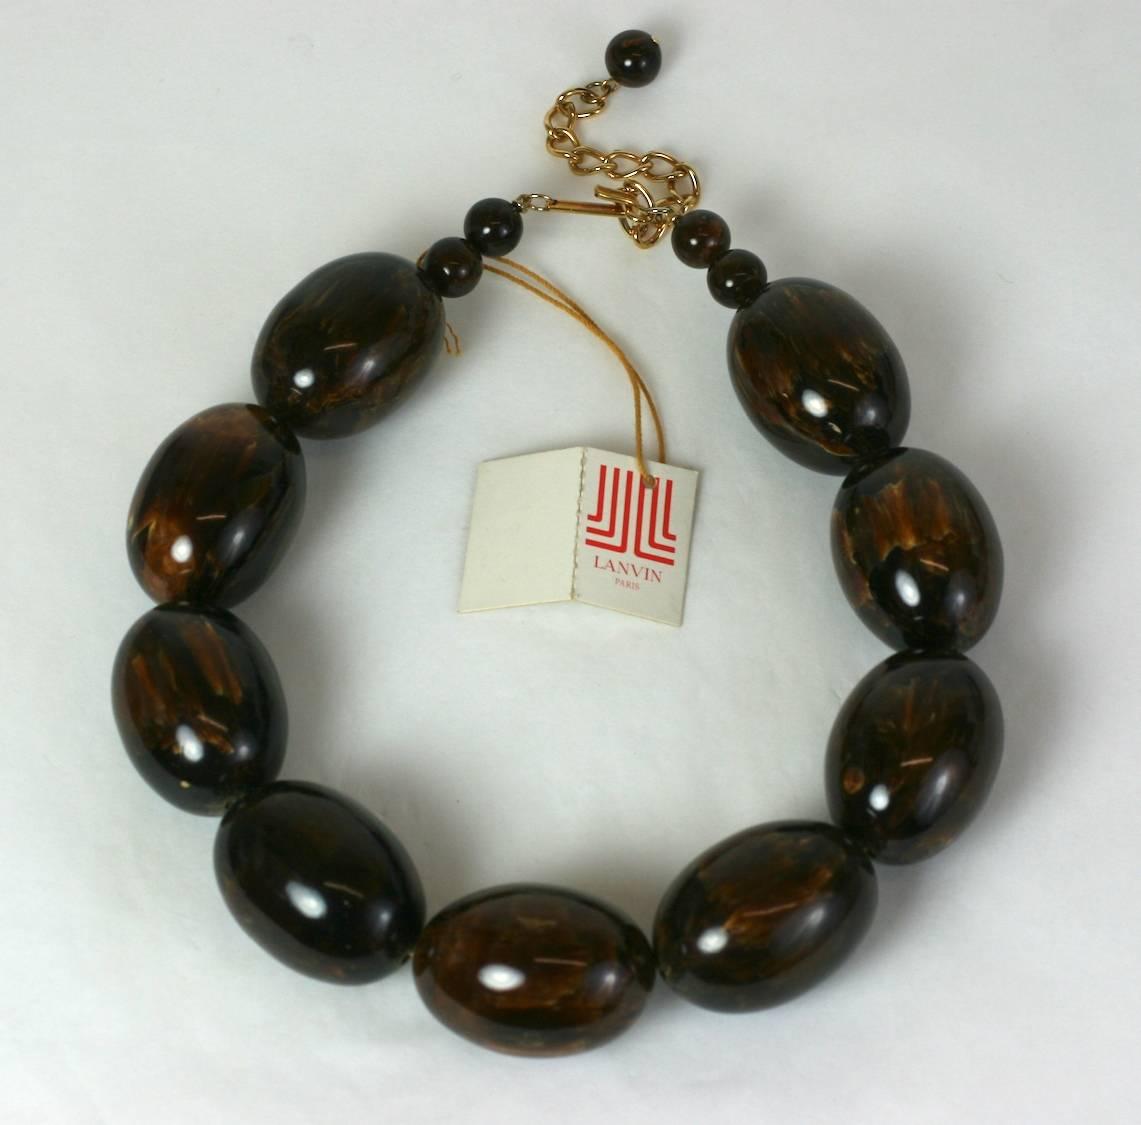 Lanvin End of Day Brown Bakelite Beads from the 1970's. Oversized mottled brown bakelite egg shaped beads are used for this imposing necklace. 
Retains original paper label. 1970's France.
Excellent condition. 
Adjusts from 16" to 19", 